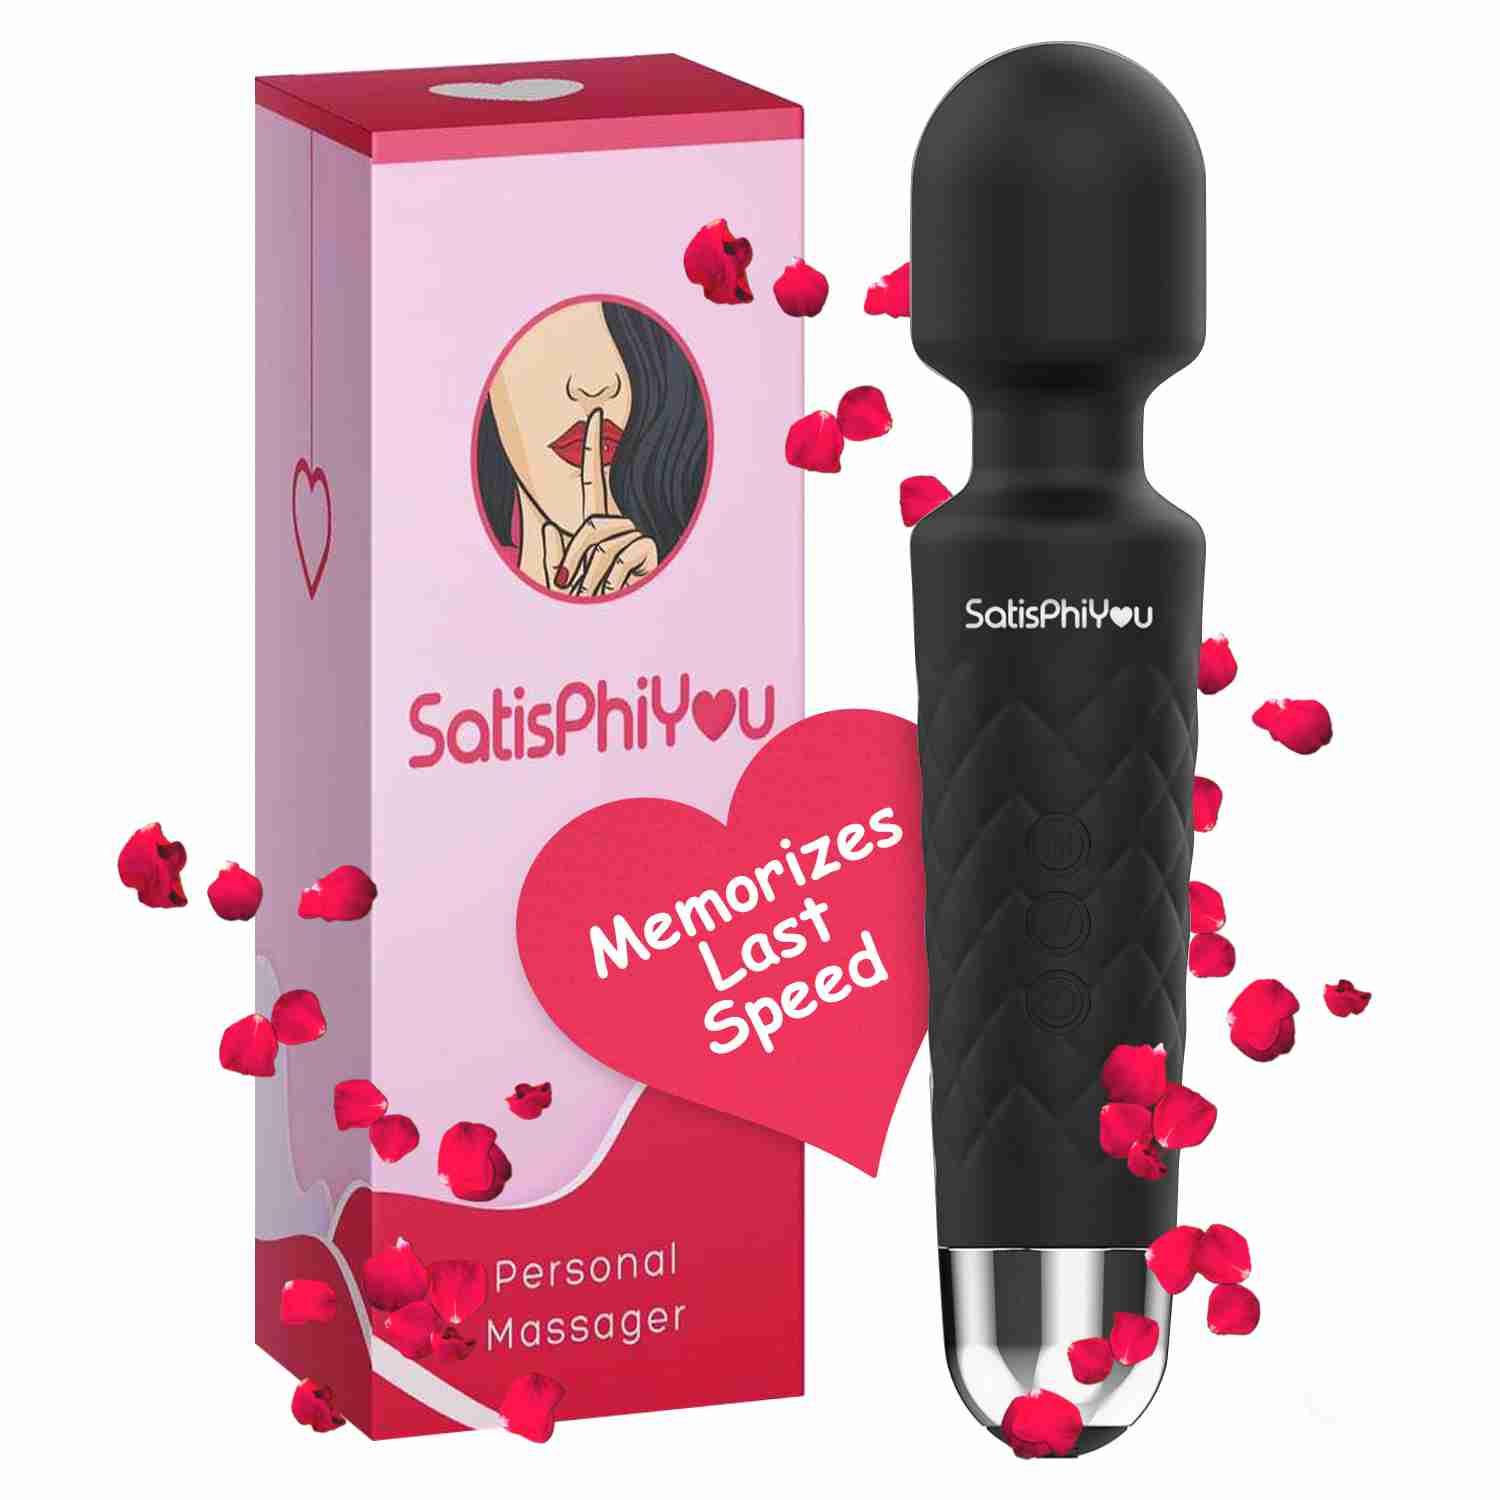 massager-adult-vibrator-rose-toy-free-women with cash back rebate